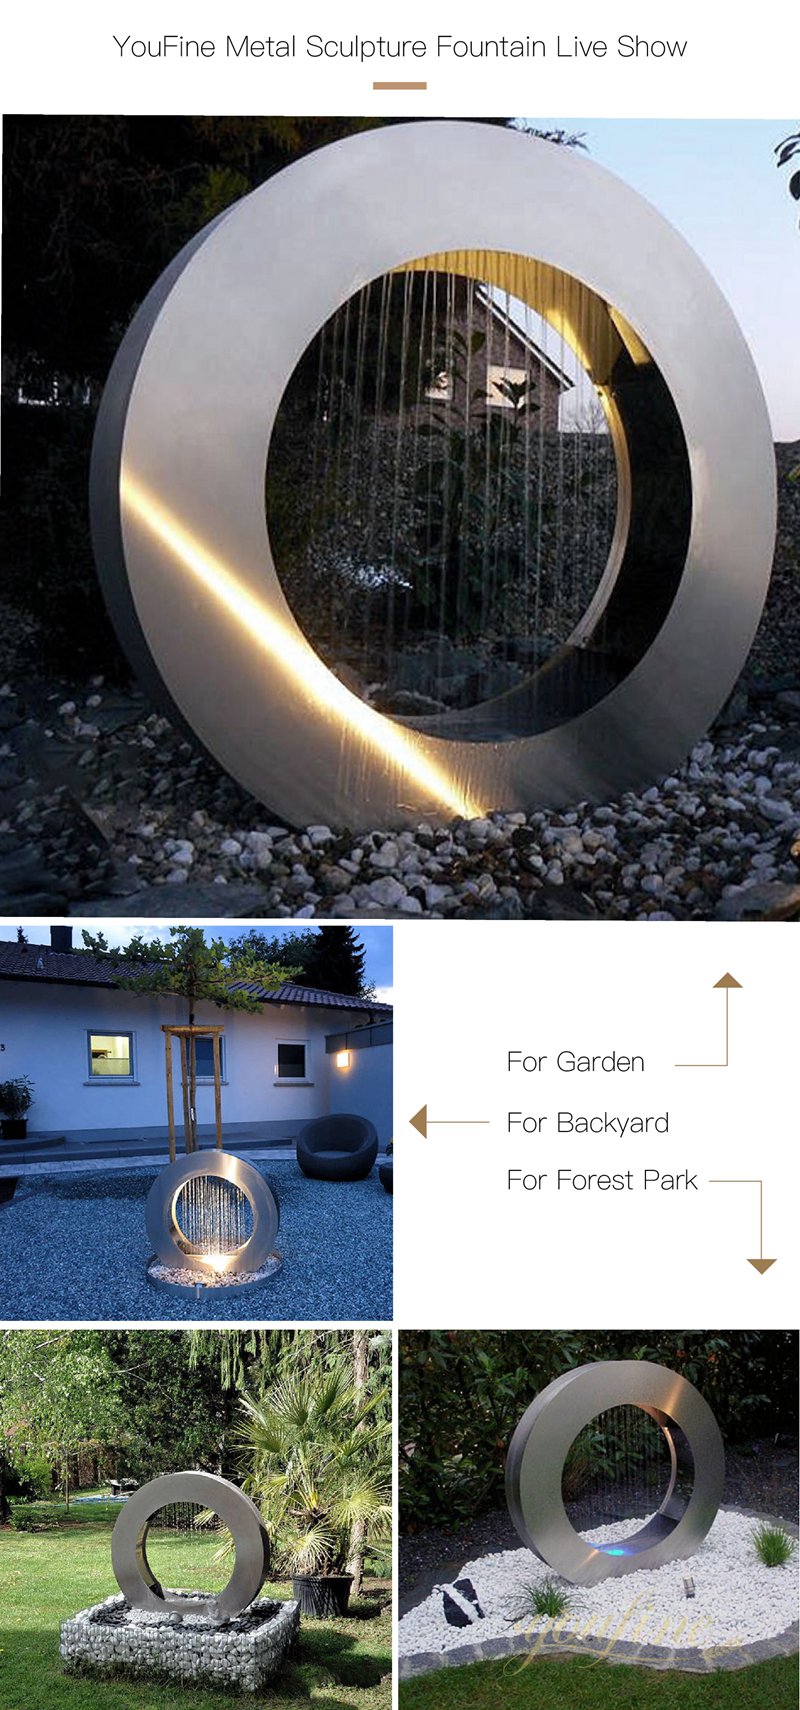 Modern Stainless Steel Harp Sculpture with Lighting - Abstract Water Sculpture - 5